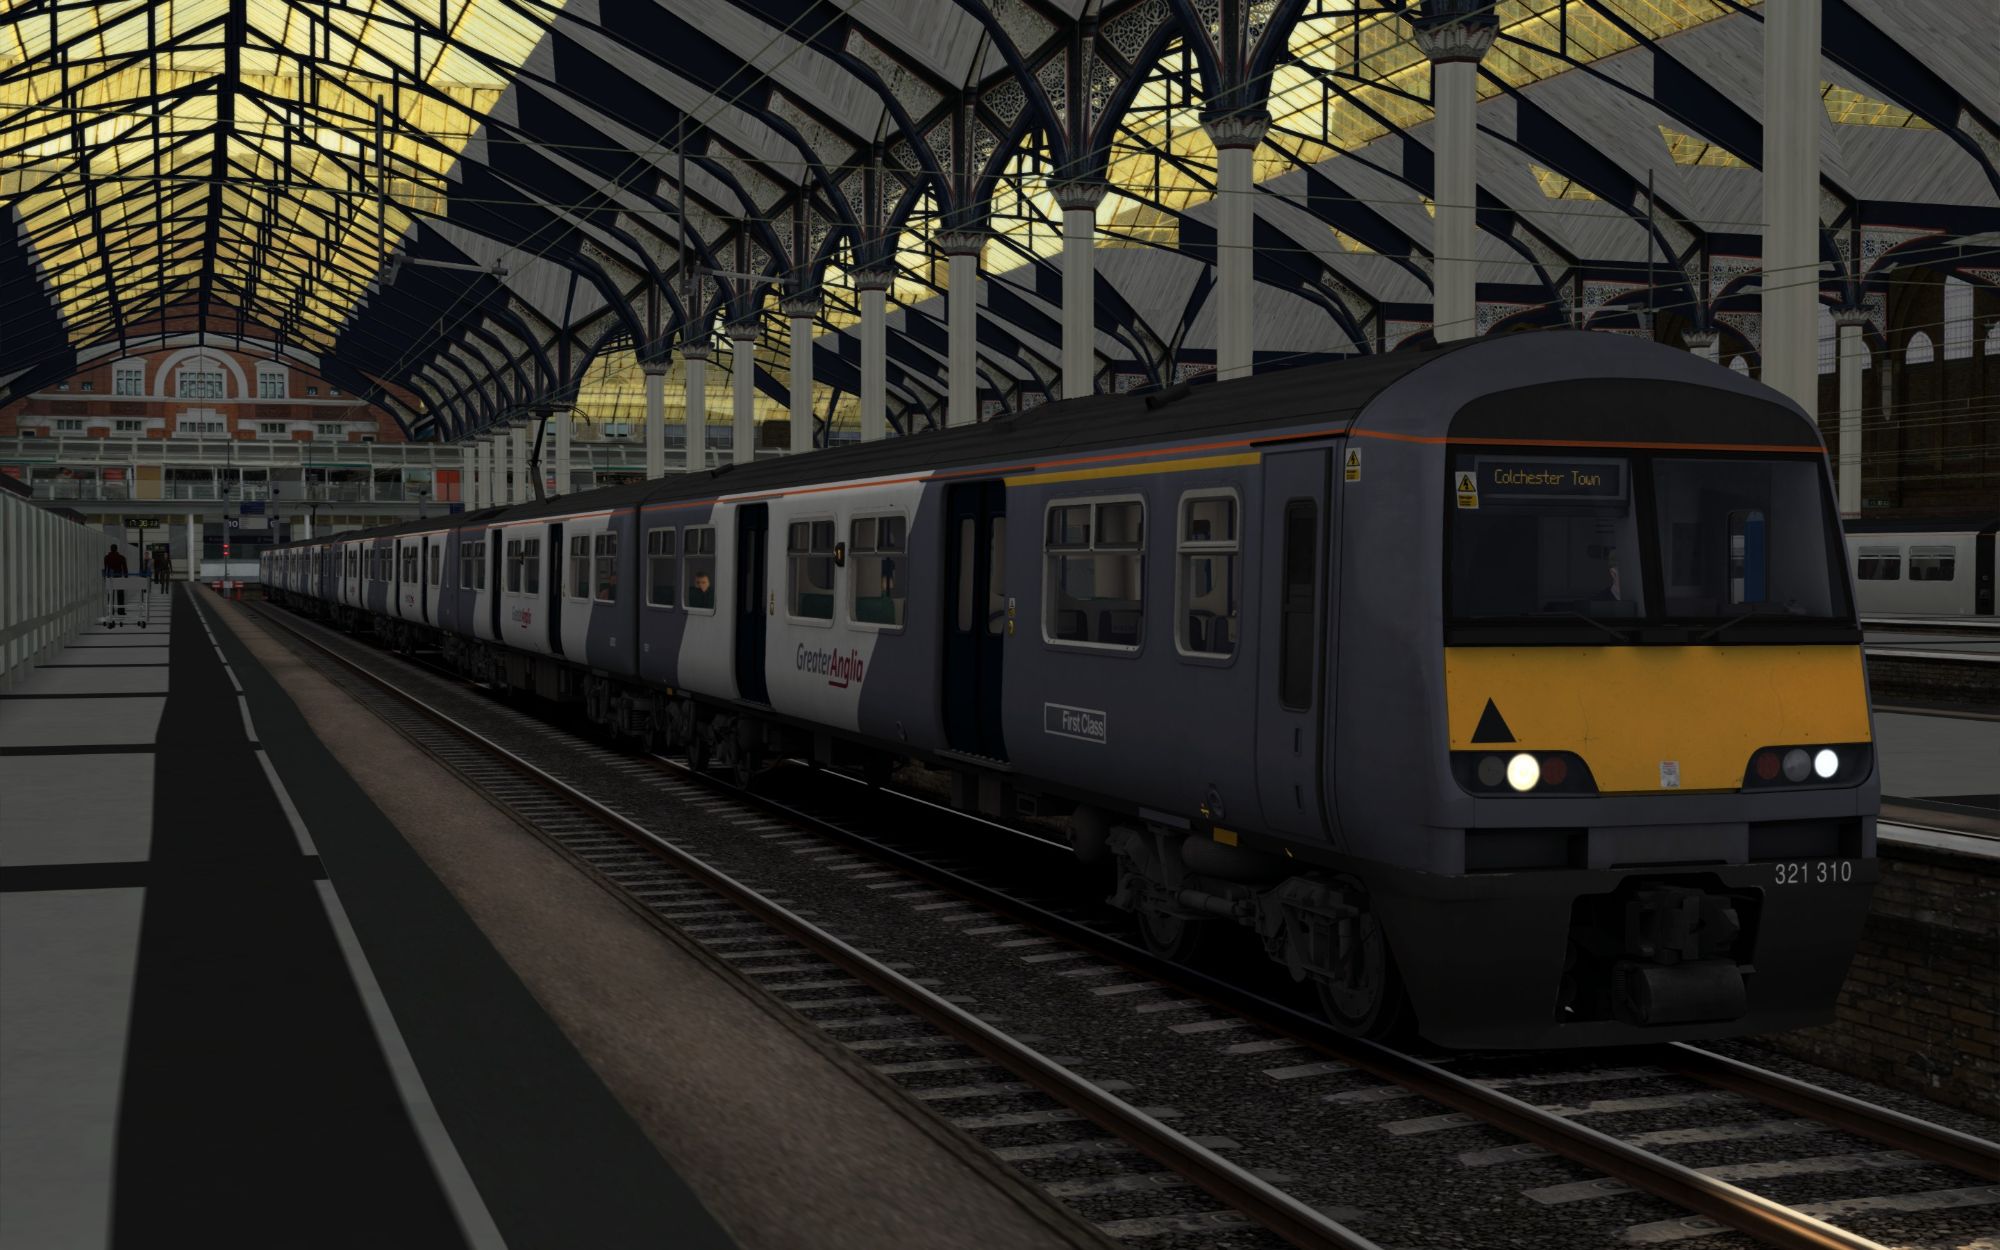 Image showing screenshot of the 1F46 - 1740 London Liverpool Street to Colchester Town scenario